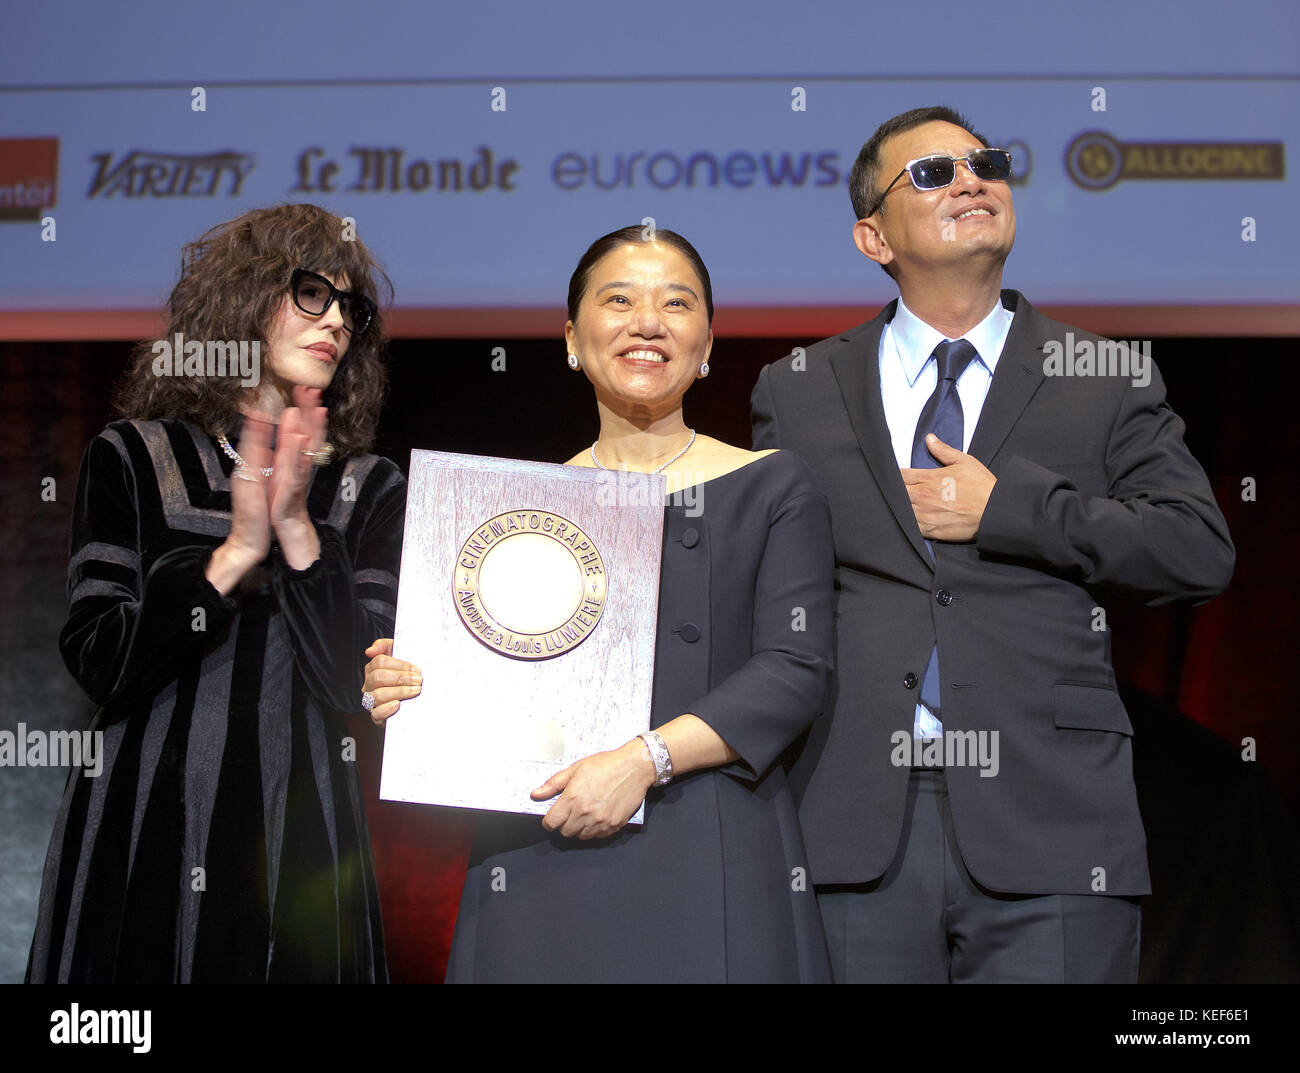 Lyon, France. 19th Oct, 2017. French actress Isabelle Adjani (left)helps present the Prix Lumiere 2017 to Chinese director Wong Kar-wai (right). The presentation marks the high point of the 9th annual Festival Lumiere, a film festival devoted to classic films. With them is Wong Kar-wei's wife and collaborator Esther. Credit: James Colburn/ZUMA Wire/Alamy Live News Stock Photo